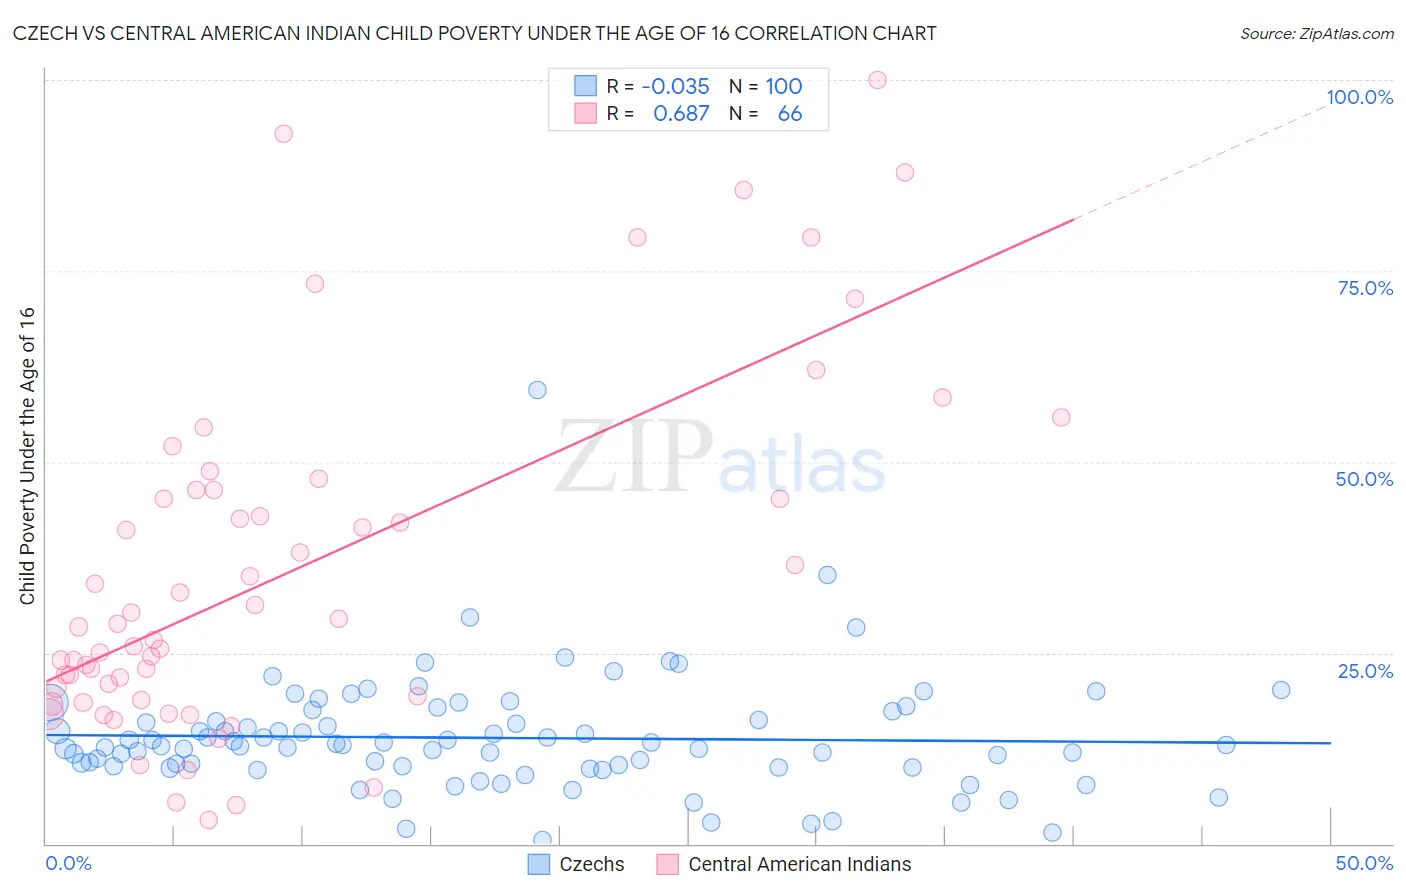 Czech vs Central American Indian Child Poverty Under the Age of 16